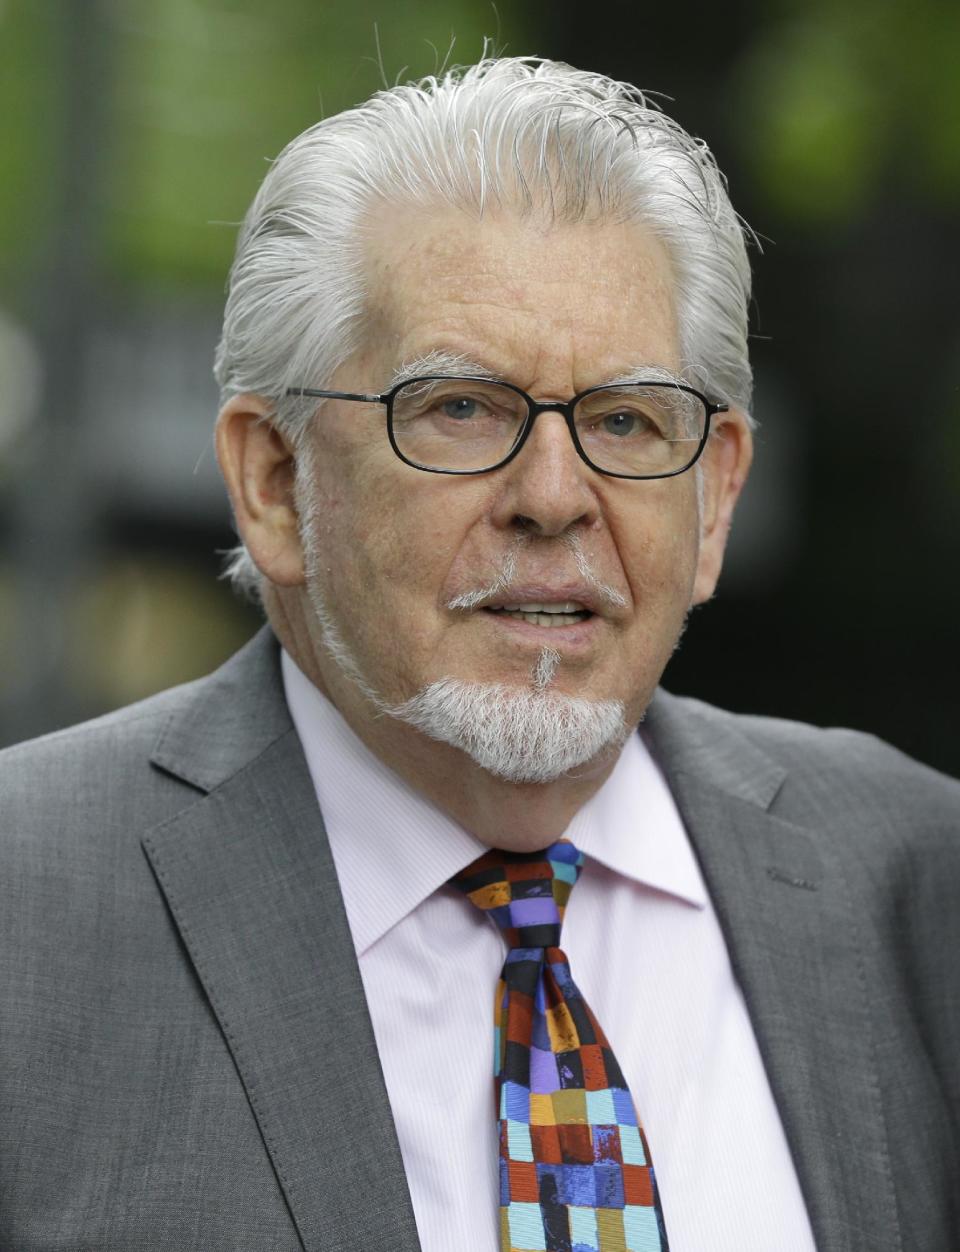 Veteran Australian-British entertainer Rolf Harris who is accused of indecent assault arrives at Southwark Crown Court in London, Friday, May 9, 2014. The 84-year-old is charged with indecently assaulting four girls between 1968 and 1986. The girls ranged in age from 7 or 8 to 19. Harris denies the charges. (AP Photo/Kirsty Wigglesworth)